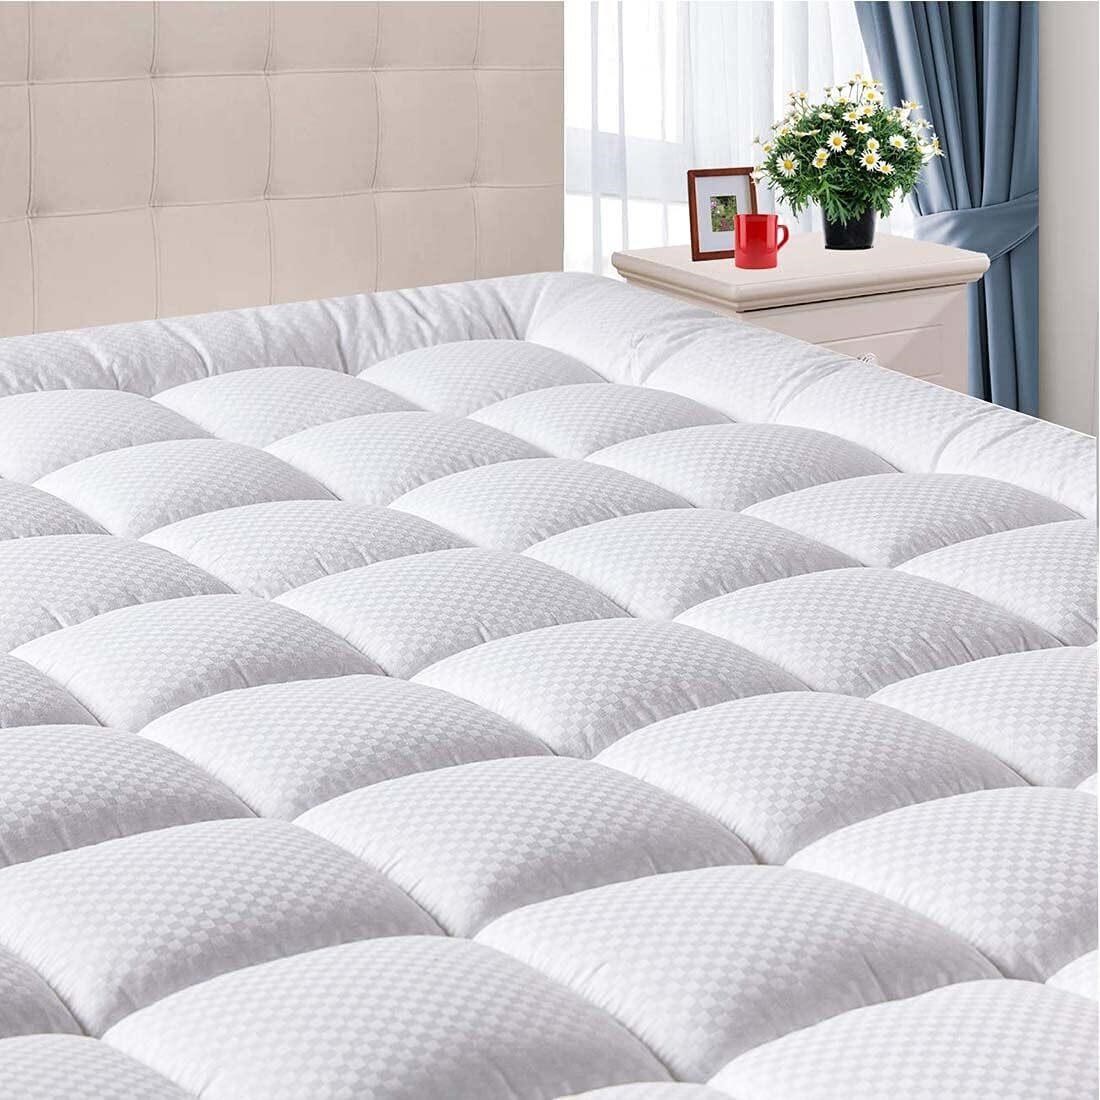 DOMICARE King Size Quilted Mattress Pad Cover